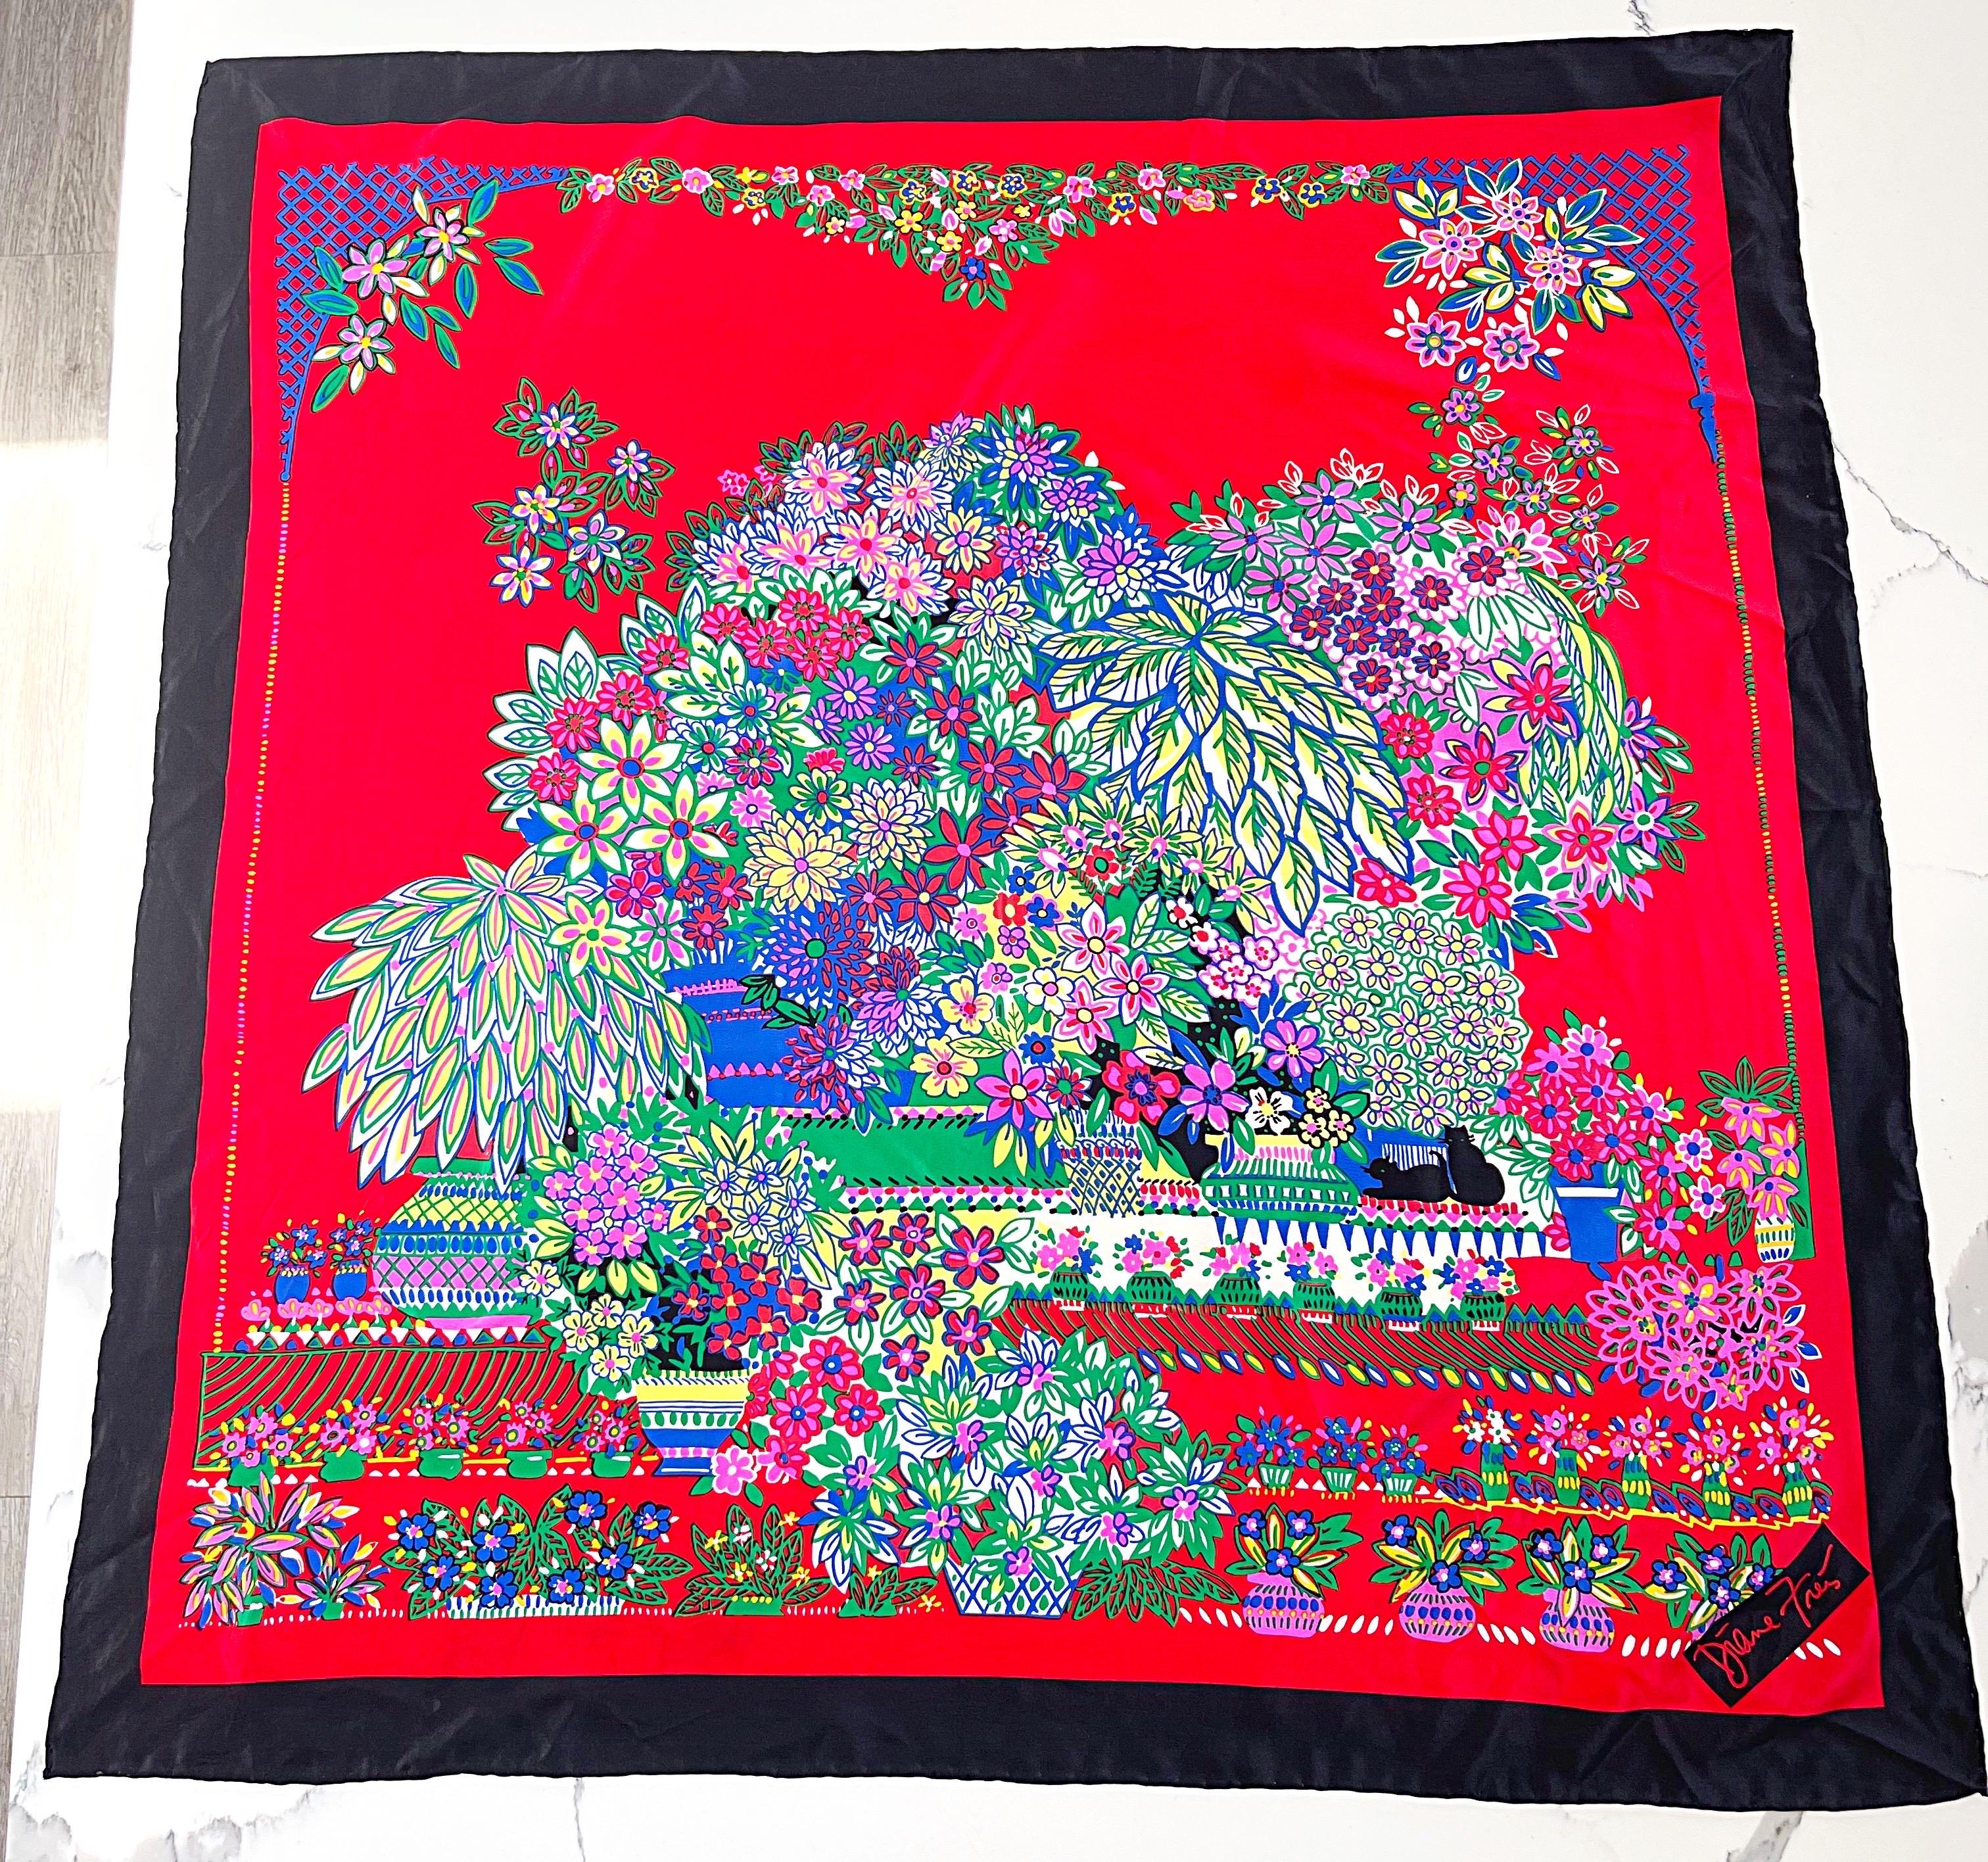 Colorful 1980s DIANE FREIS large silk scarf ! The options are endless with this beauty. Wear it as a headscarf, drape it around your shoulders as a shawl, wear it wrapped around your neck, etc. 
Red backdrop with black border. Colorful flowers in